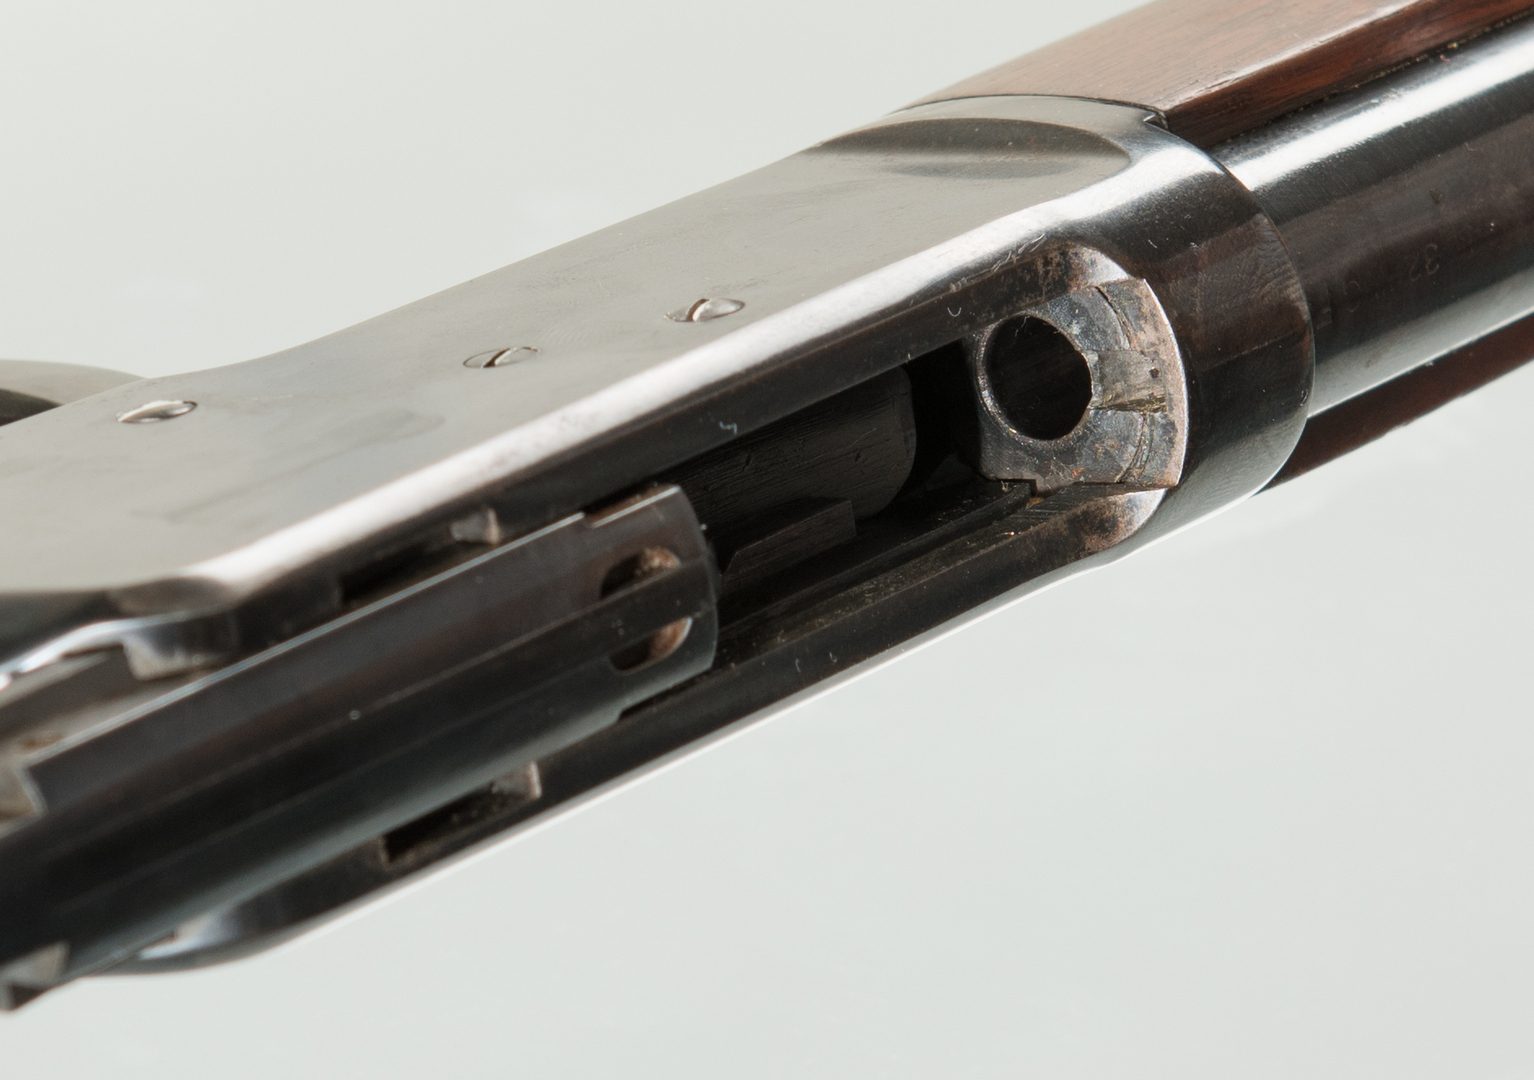 Lot 821: Winchester Model 1892, 32-20 Win Lever Action Rifle